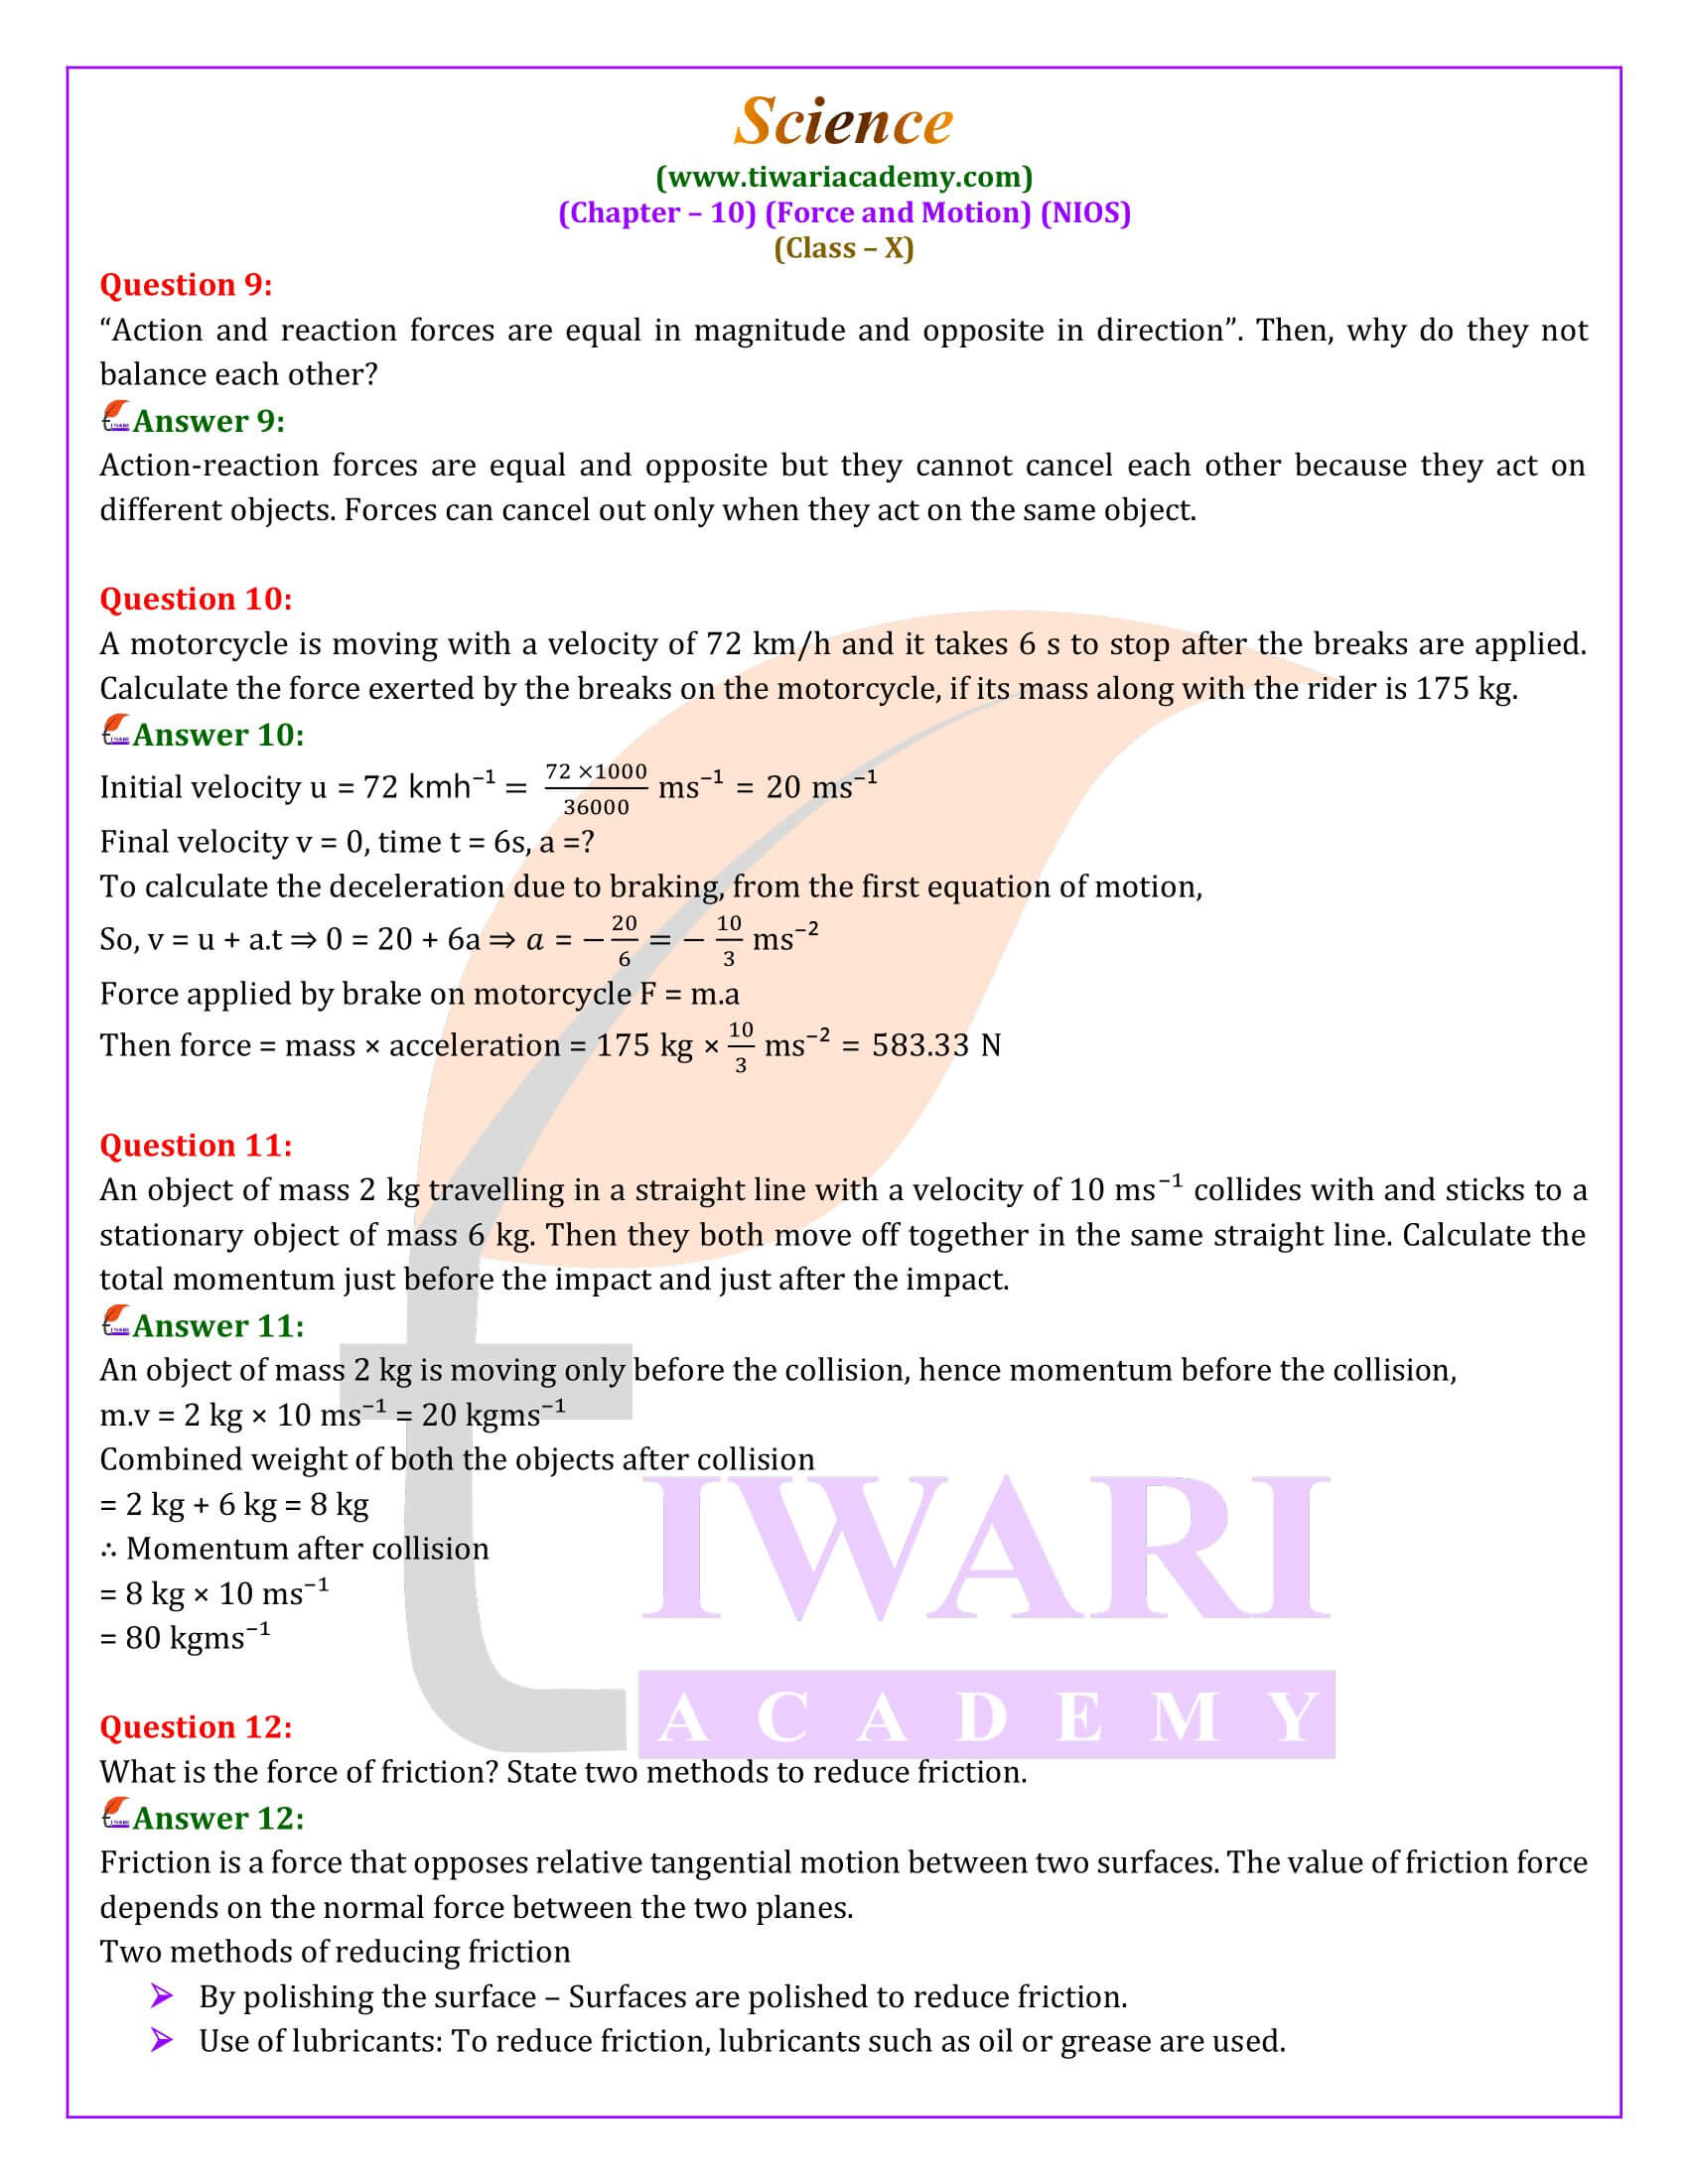 NIOS Class 10 Science Chapter 10 Solutions